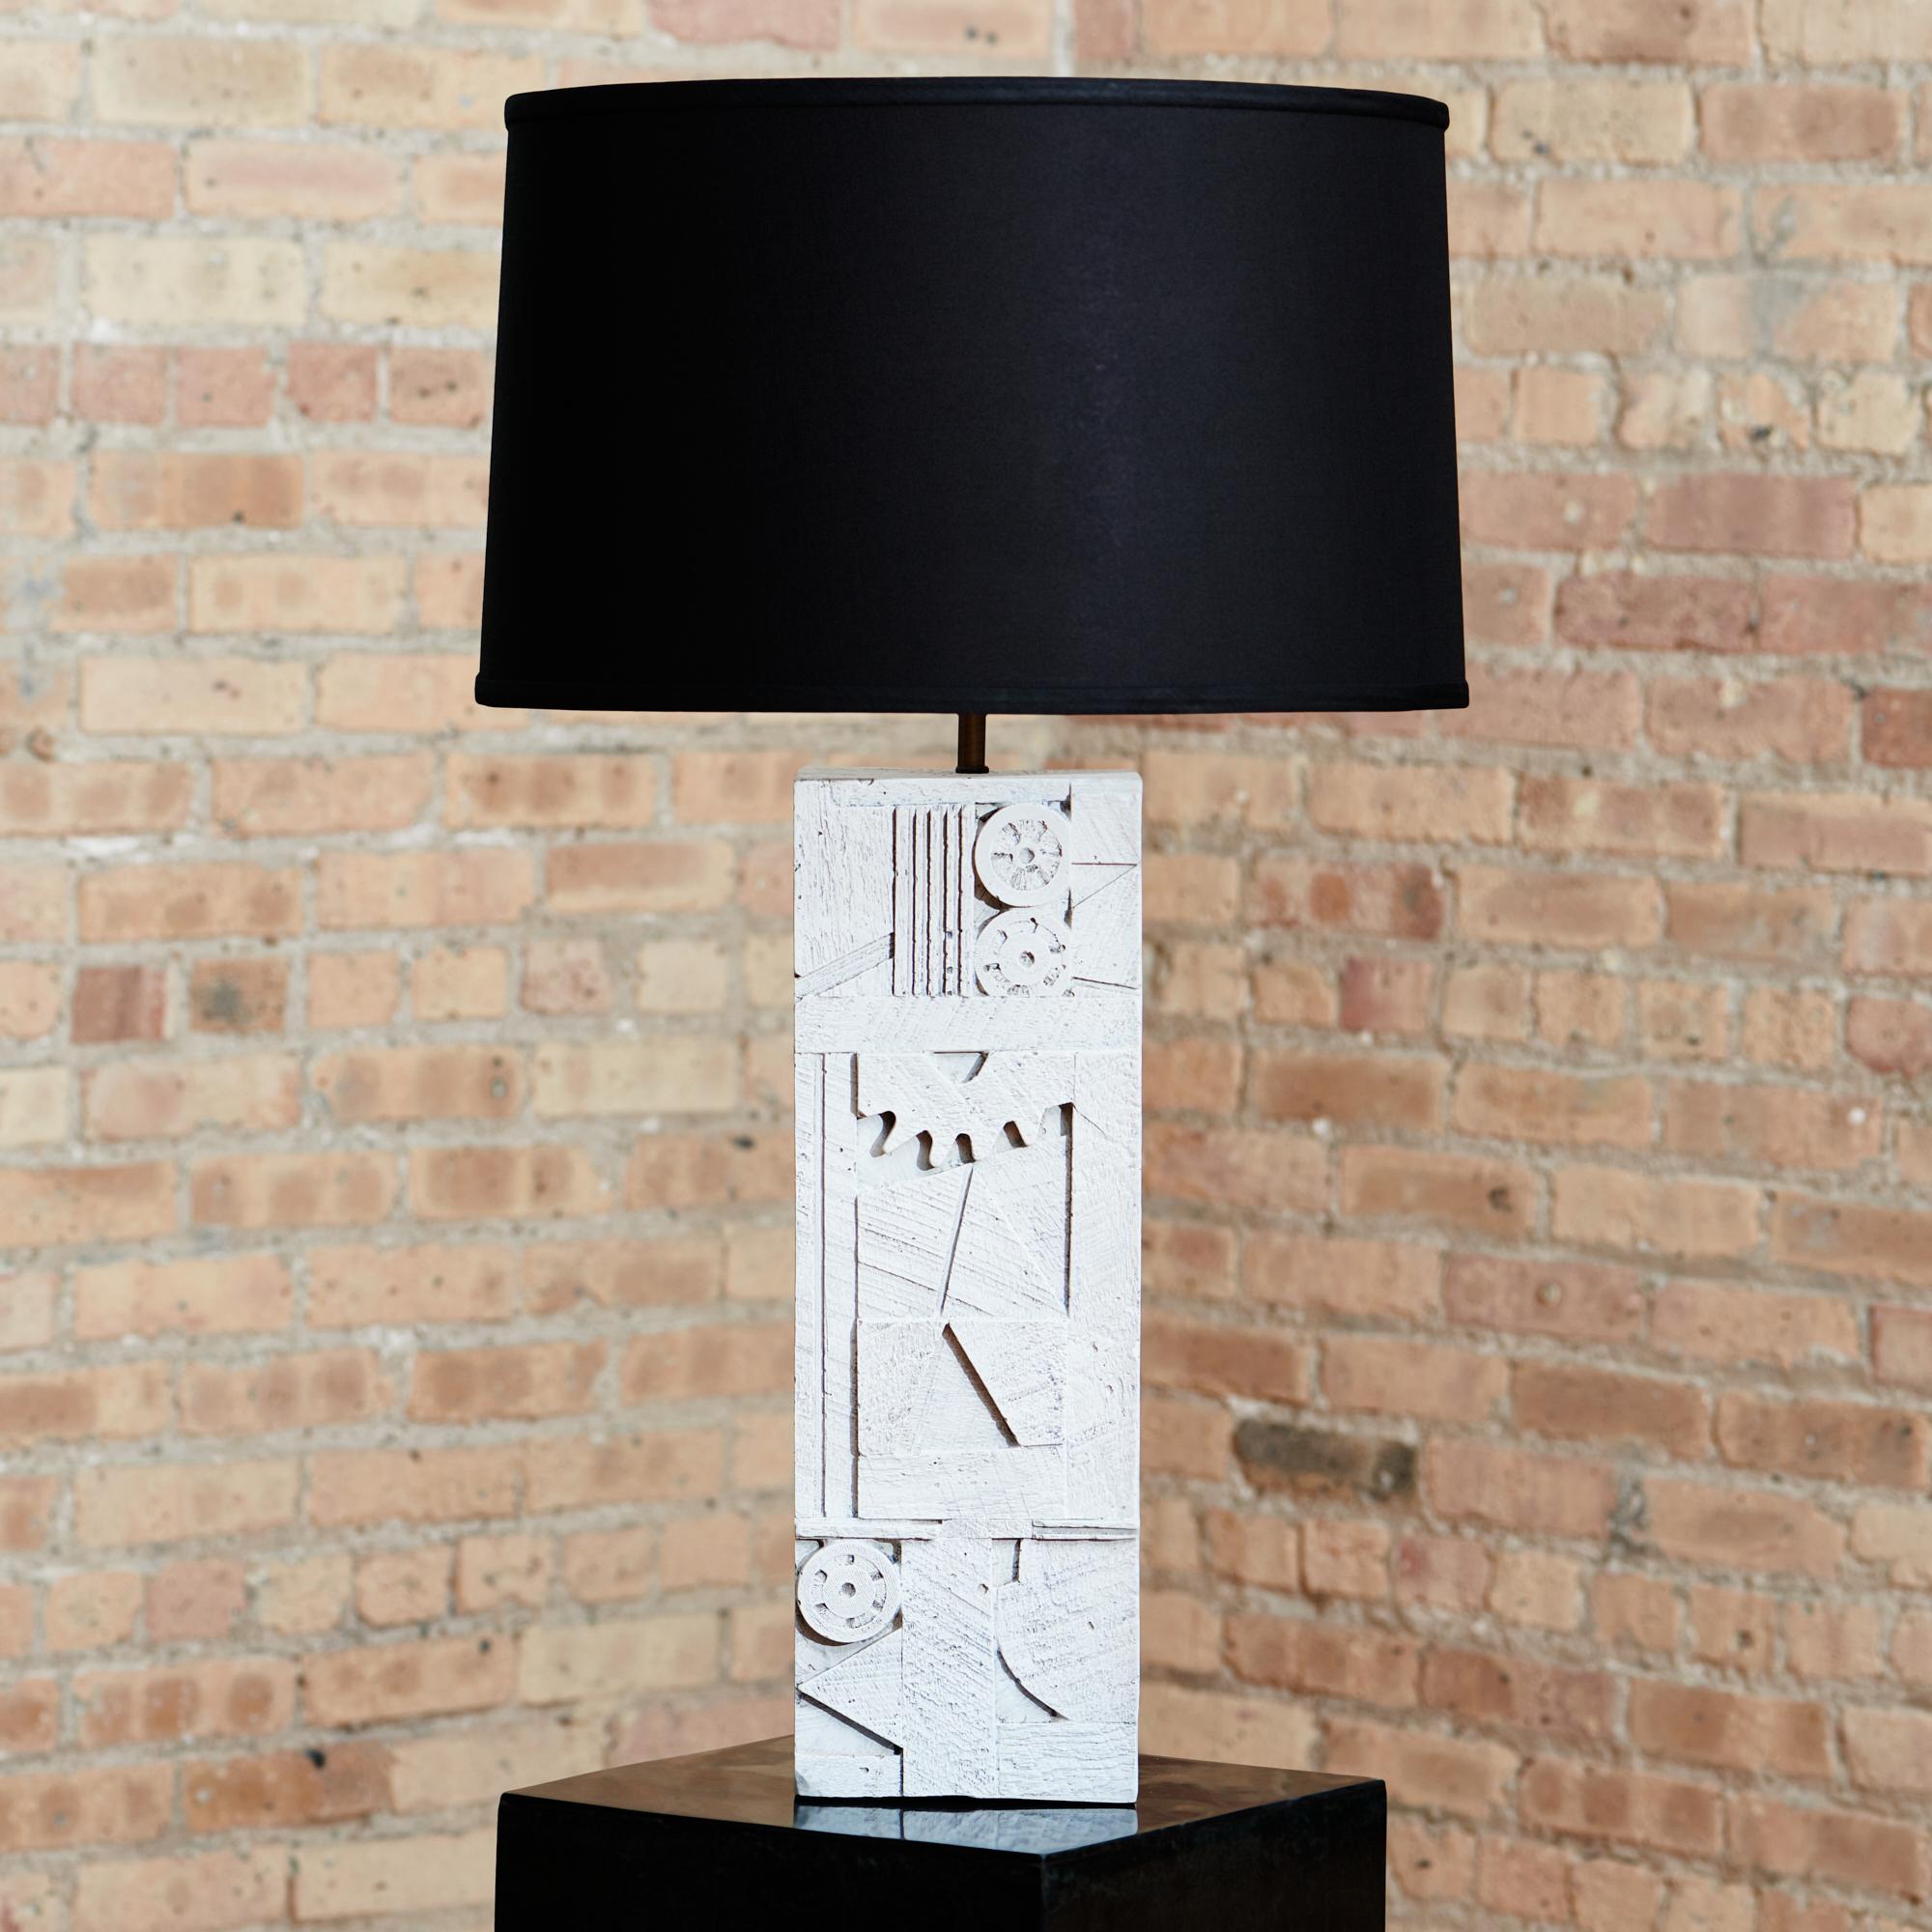 White modern table lamps designed by Dan Schneiger. Lamp consists of wood base finished with acrylic paint to create a modern look inspired by the cross section of architecture and nature. 

Each lamp is one of one and comes in various finishing